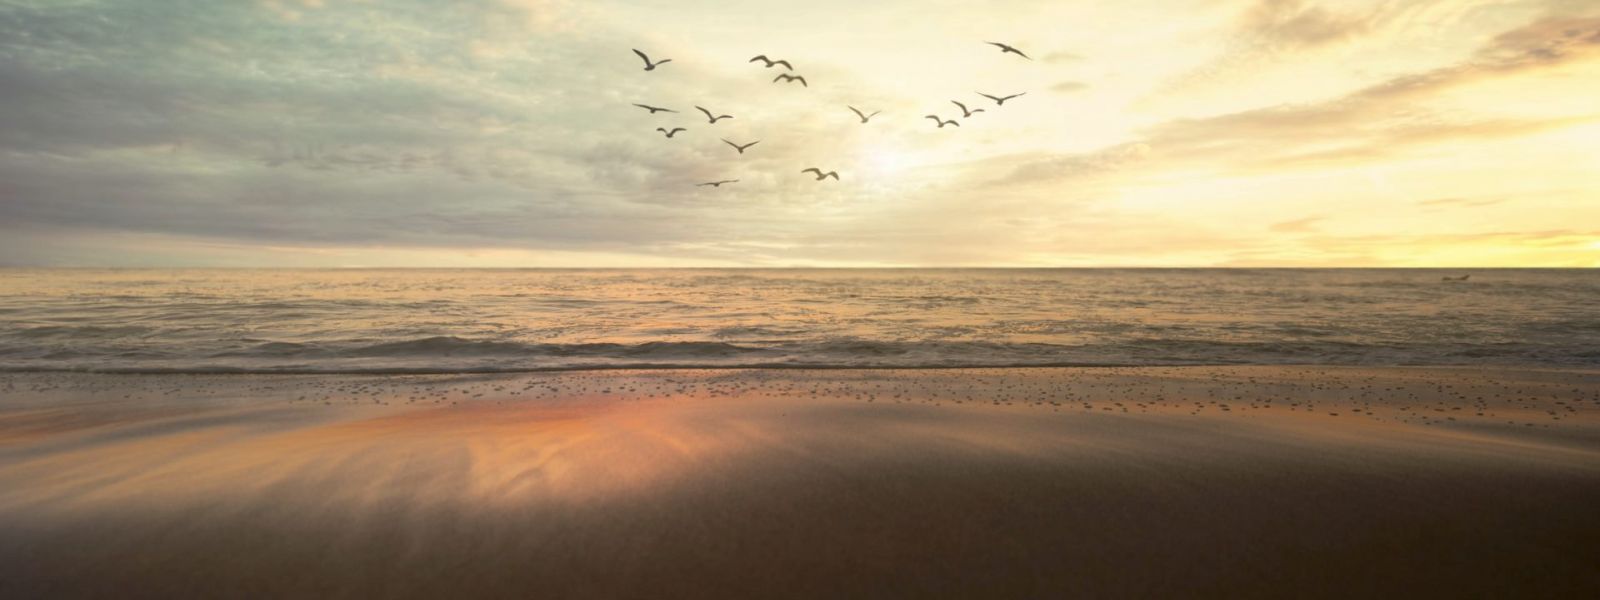 Birds flying over the sea